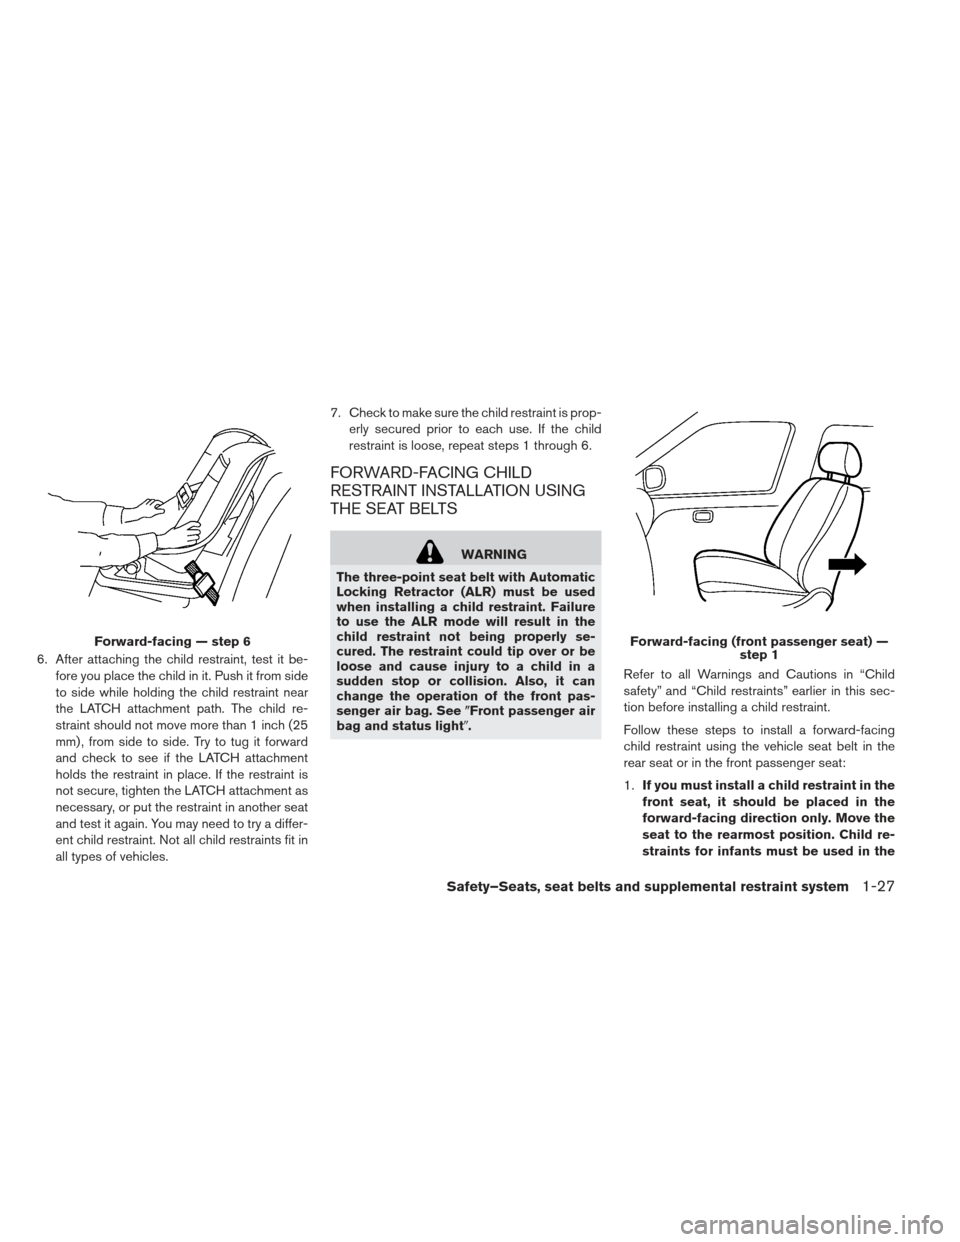 NISSAN LEAF 2013 1.G Service Manual 6. After attaching the child restraint, test it be-fore you place the child in it. Push it from side
to side while holding the child restraint near
the LATCH attachment path. The child re-
straint sho